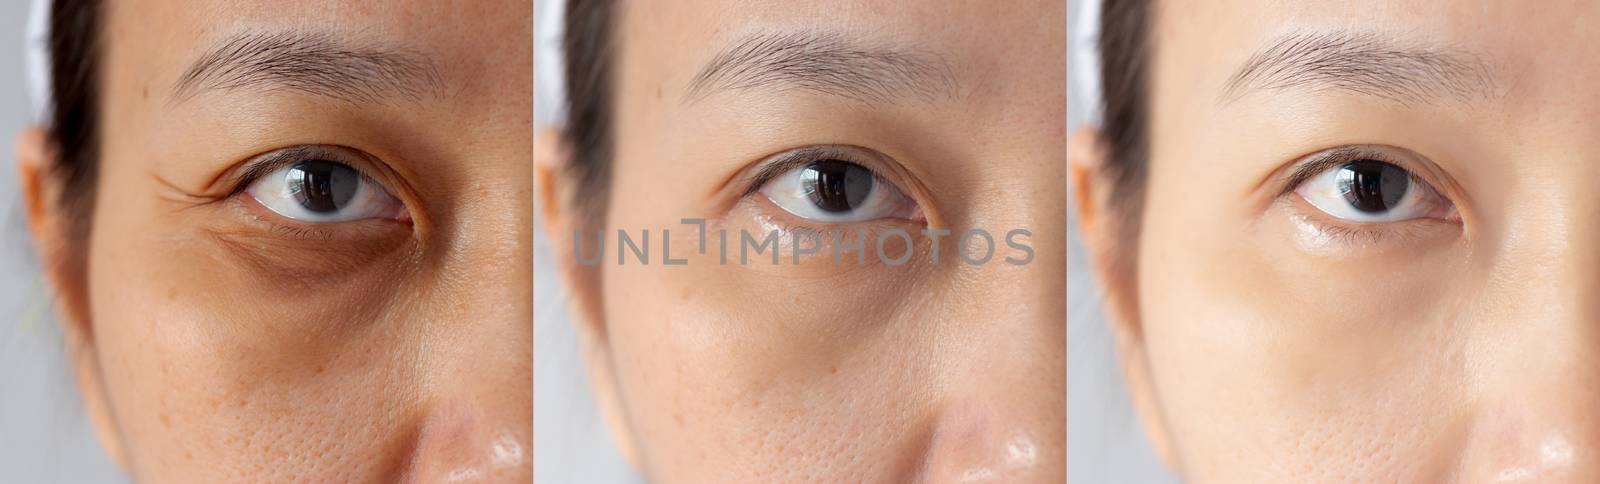 three pictures compared effect Before and After treatment. under eyes with problems of dark circles ,puffiness and wrinkles periorbital before and after treatment to solve skin problem for better skin by asiandelight